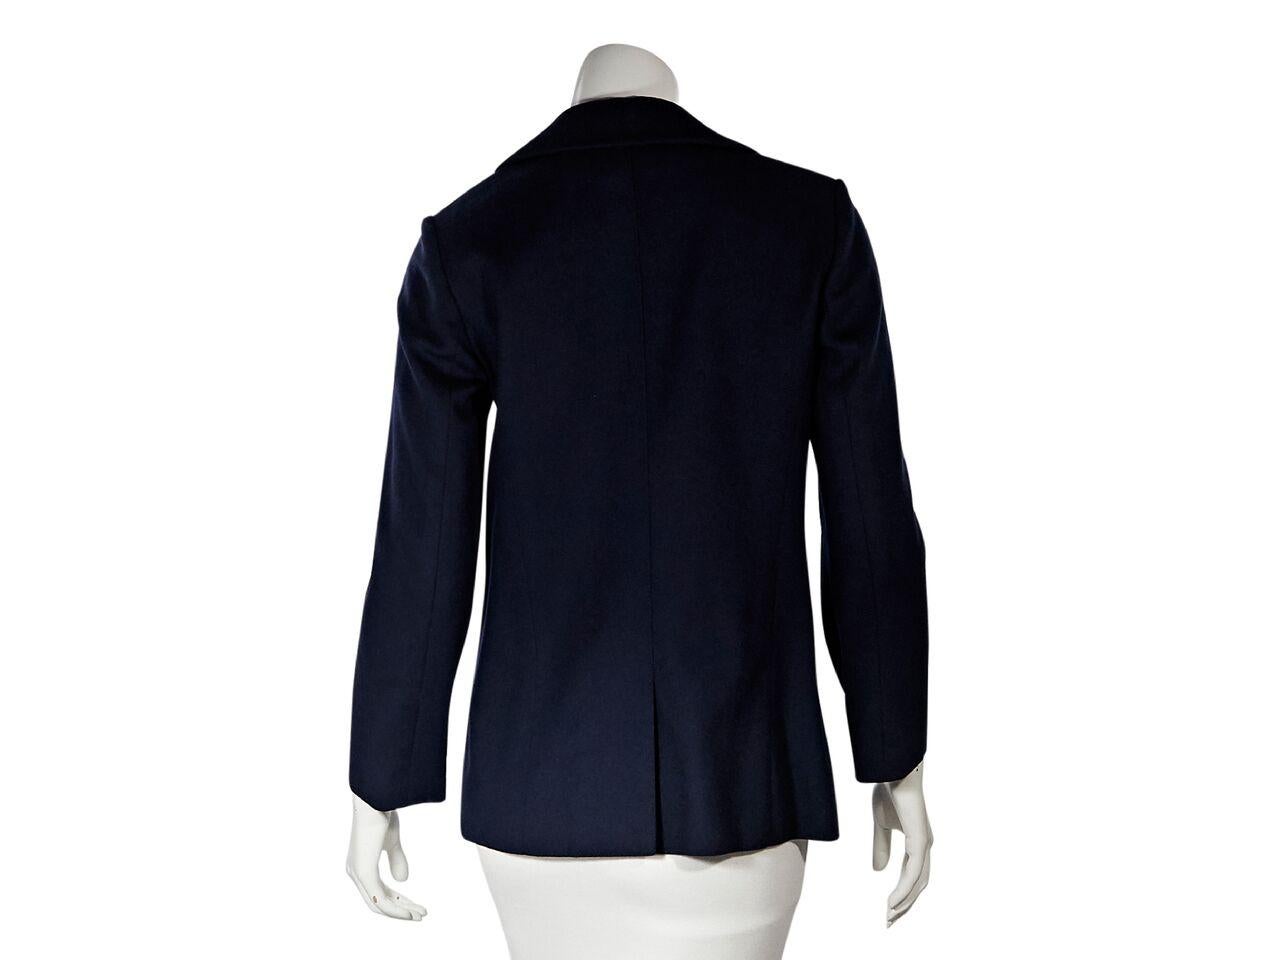 Product details:  Navy blue wool jacket by Hermes.  Spread collar.  Long sleeves.  Button-front closure.  Waist patch pocket.  Center back hem.  Goldtone hardware.  35